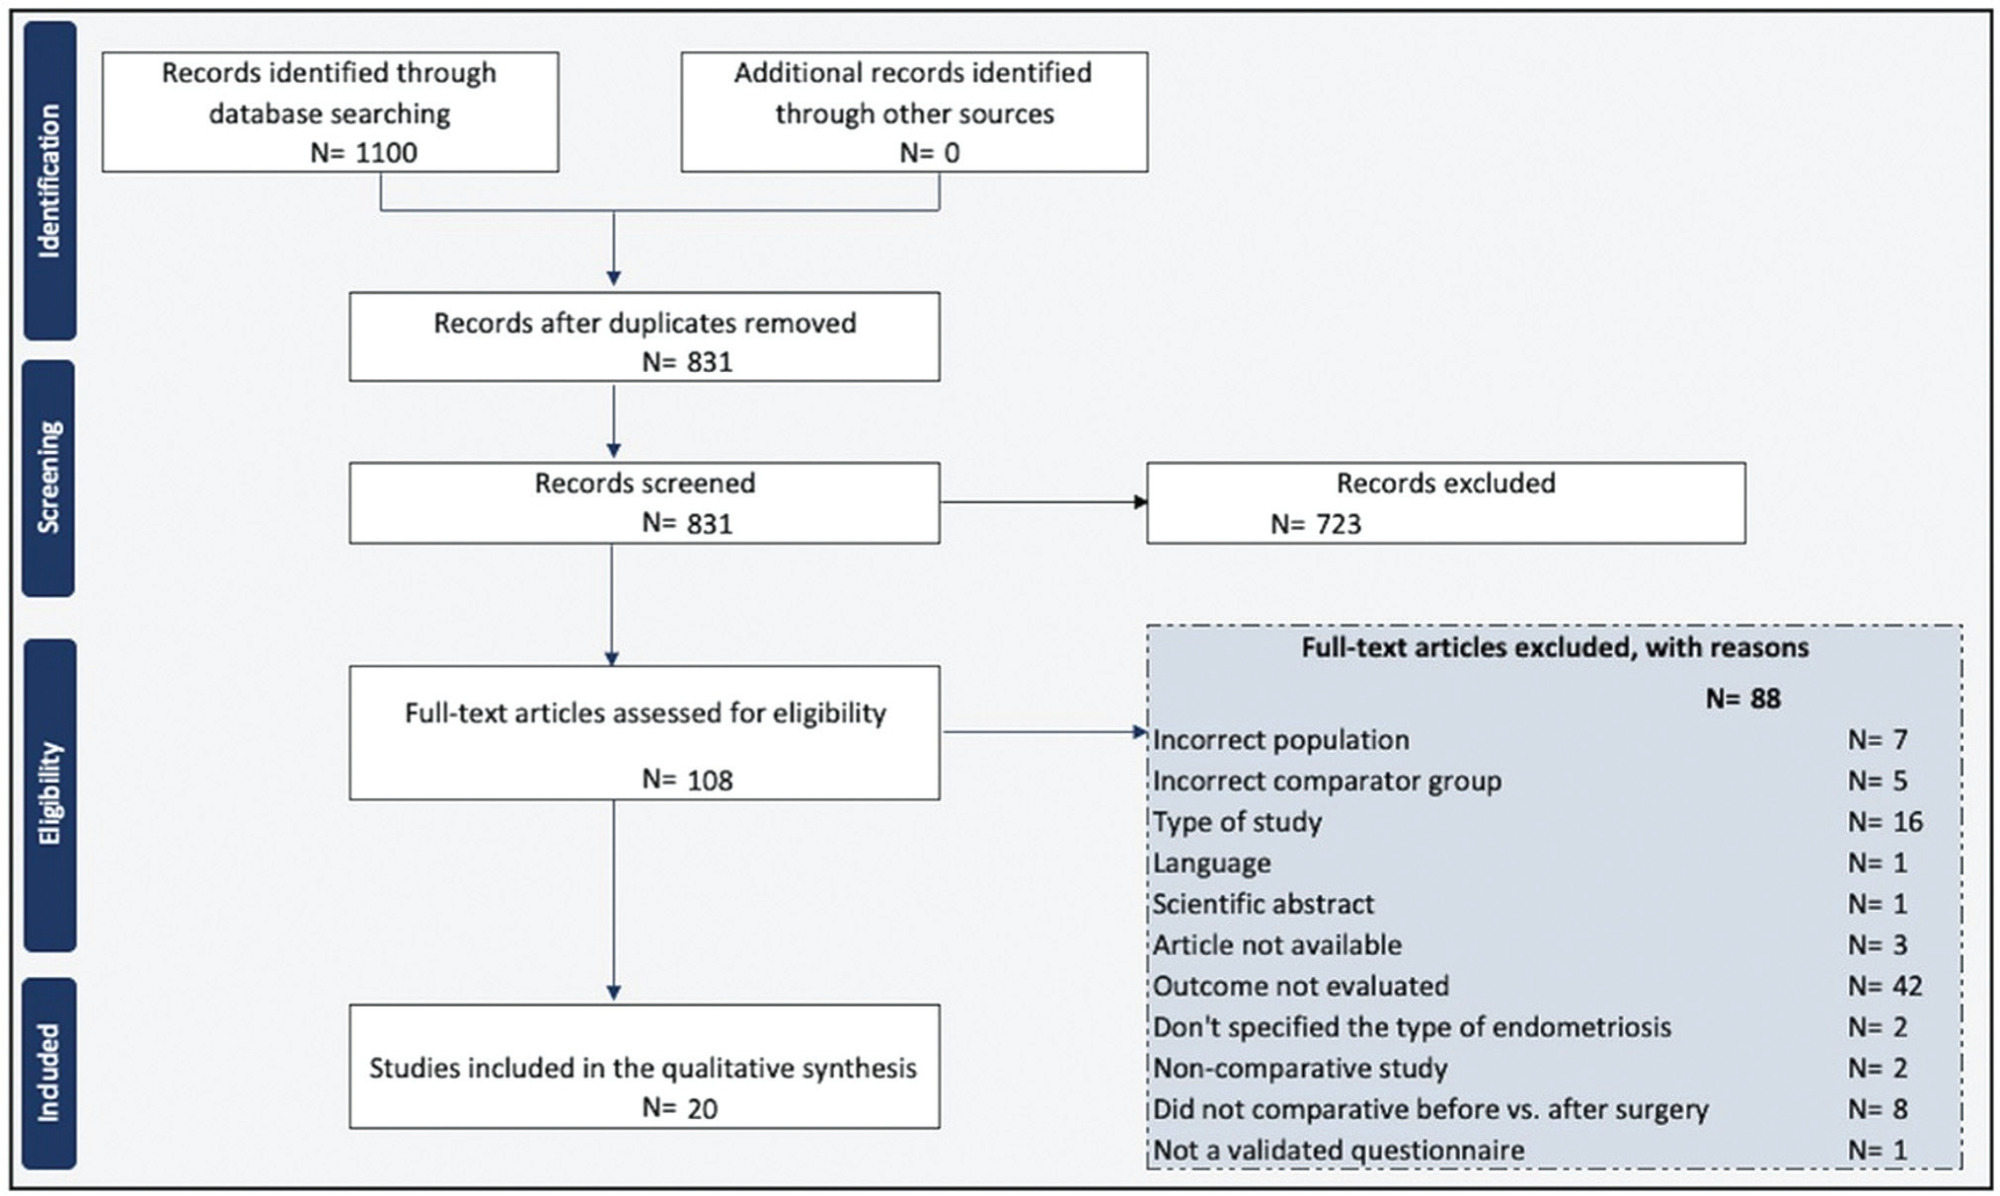 Sexual Function of Patients with Deep Endometriosis after Surgical Treatment: A Systematic Review